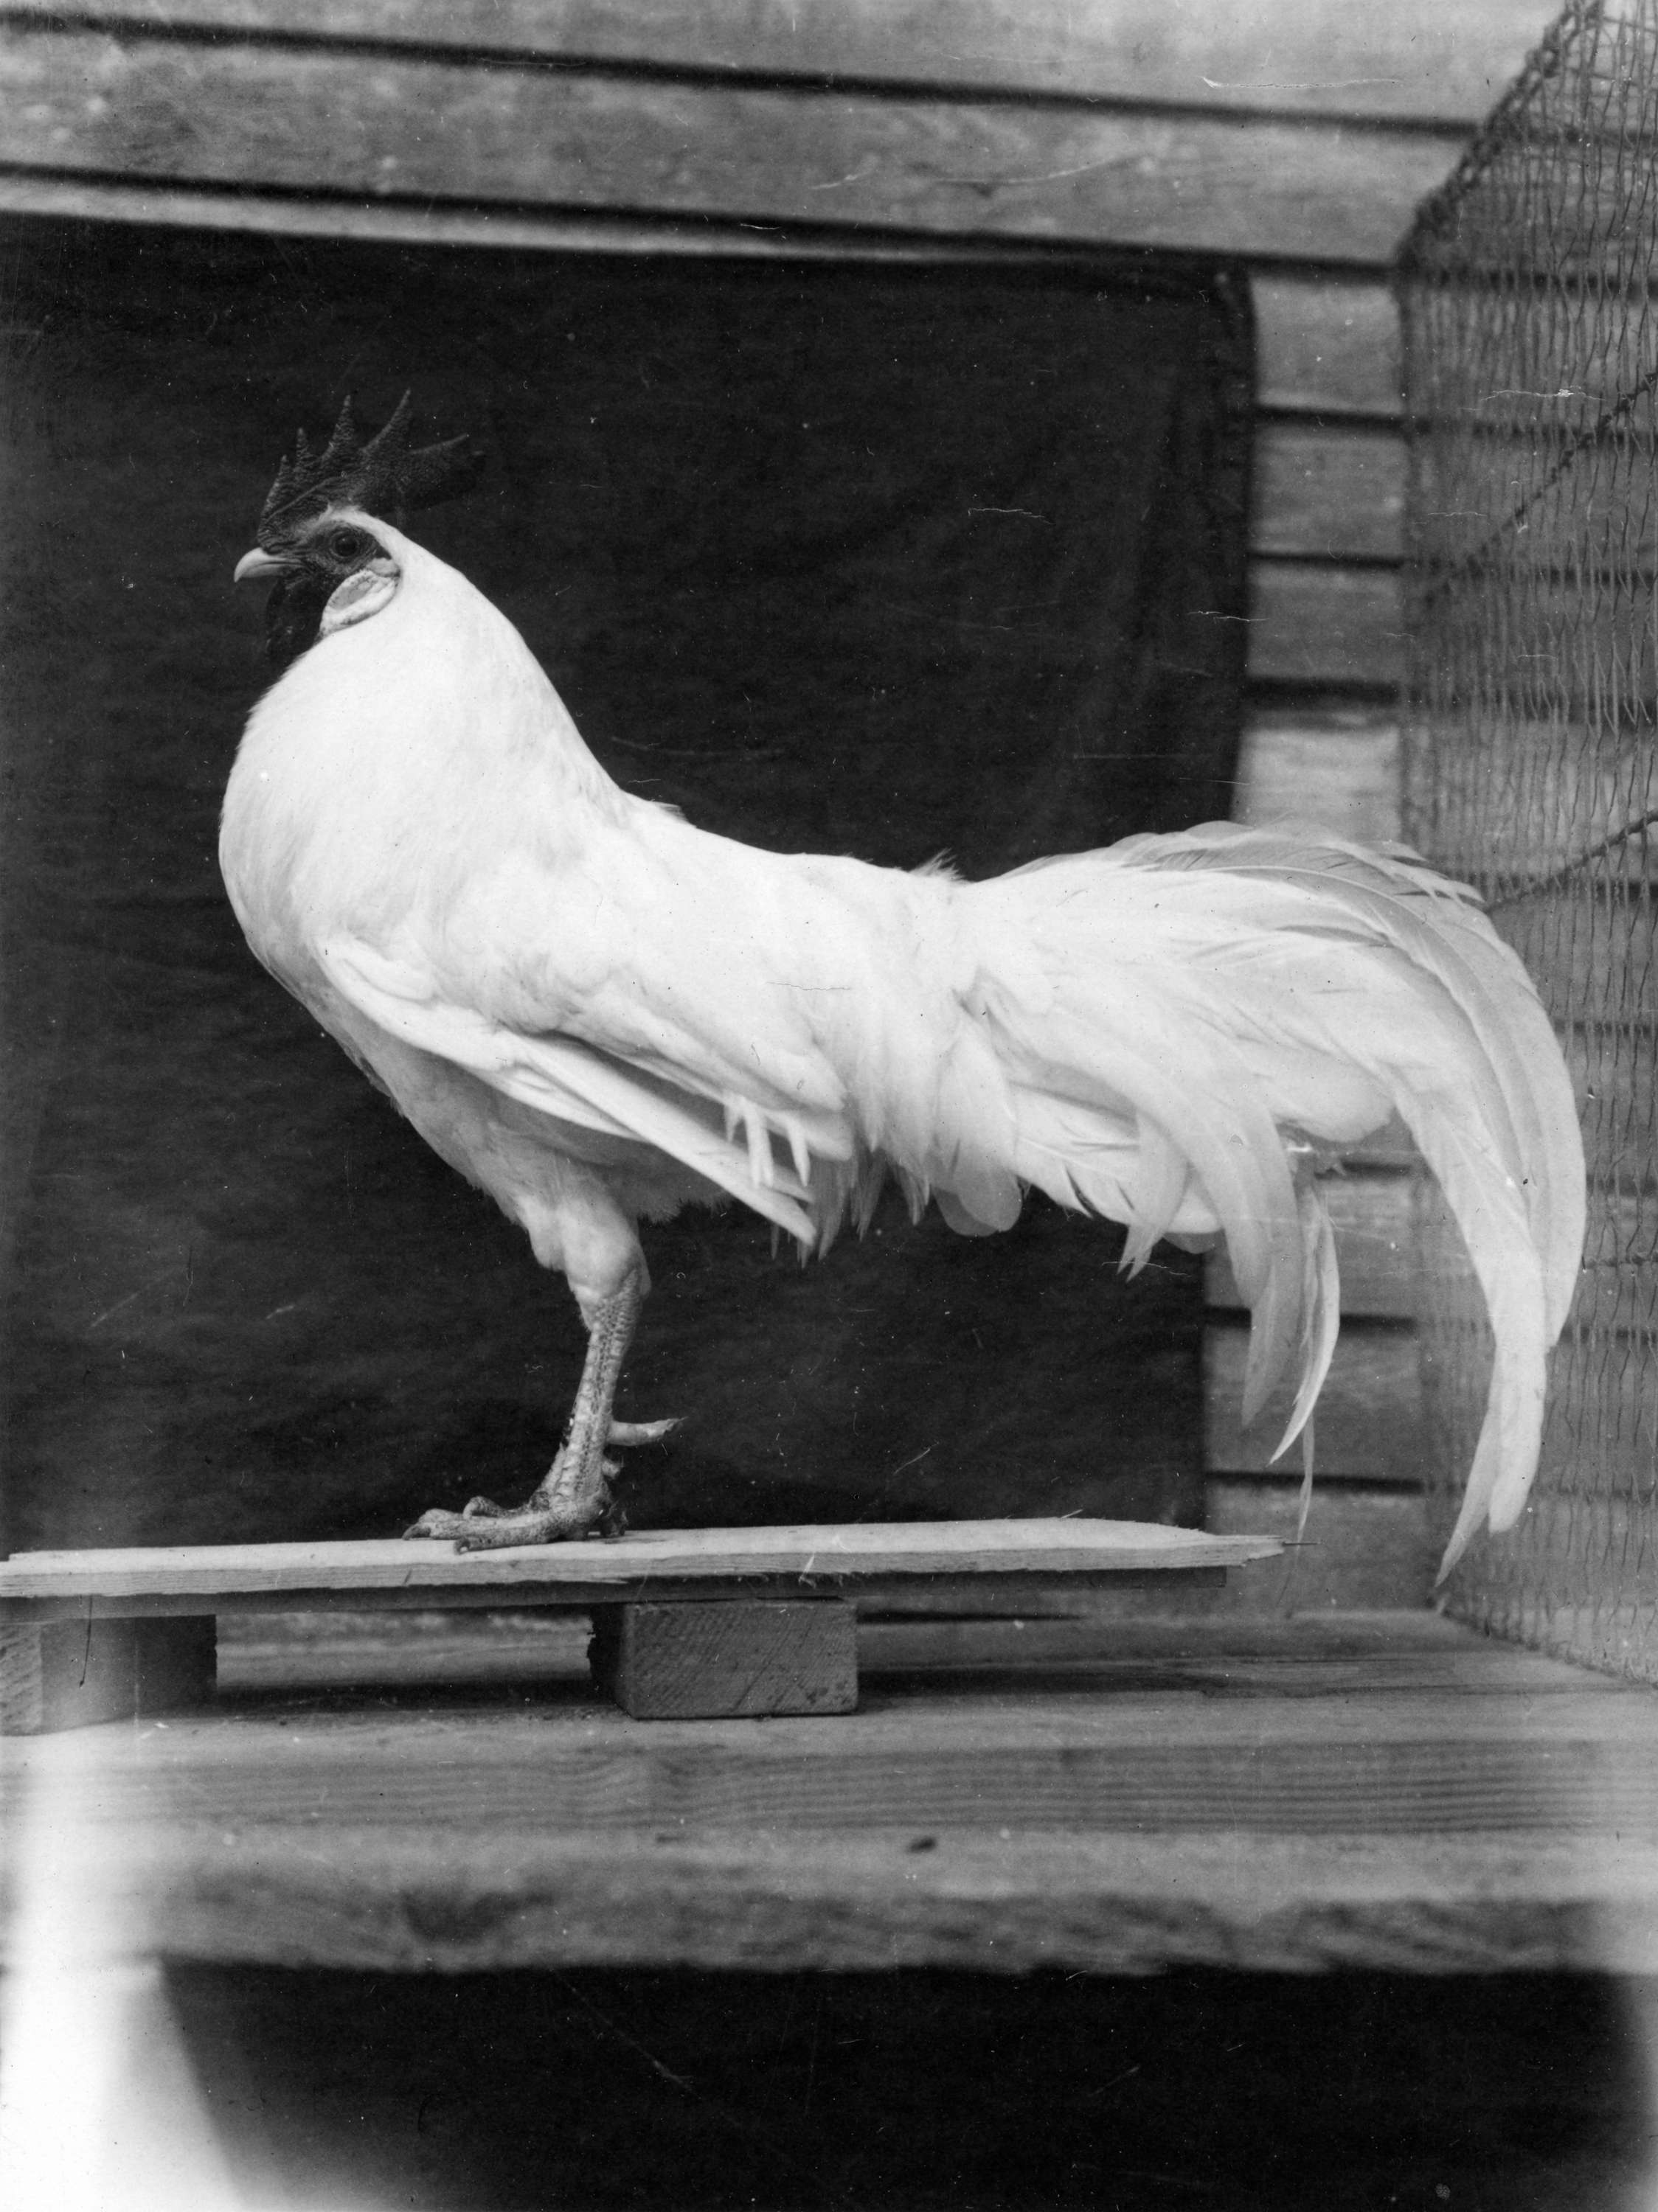 White rooster with long tail feathers and single comb - City of